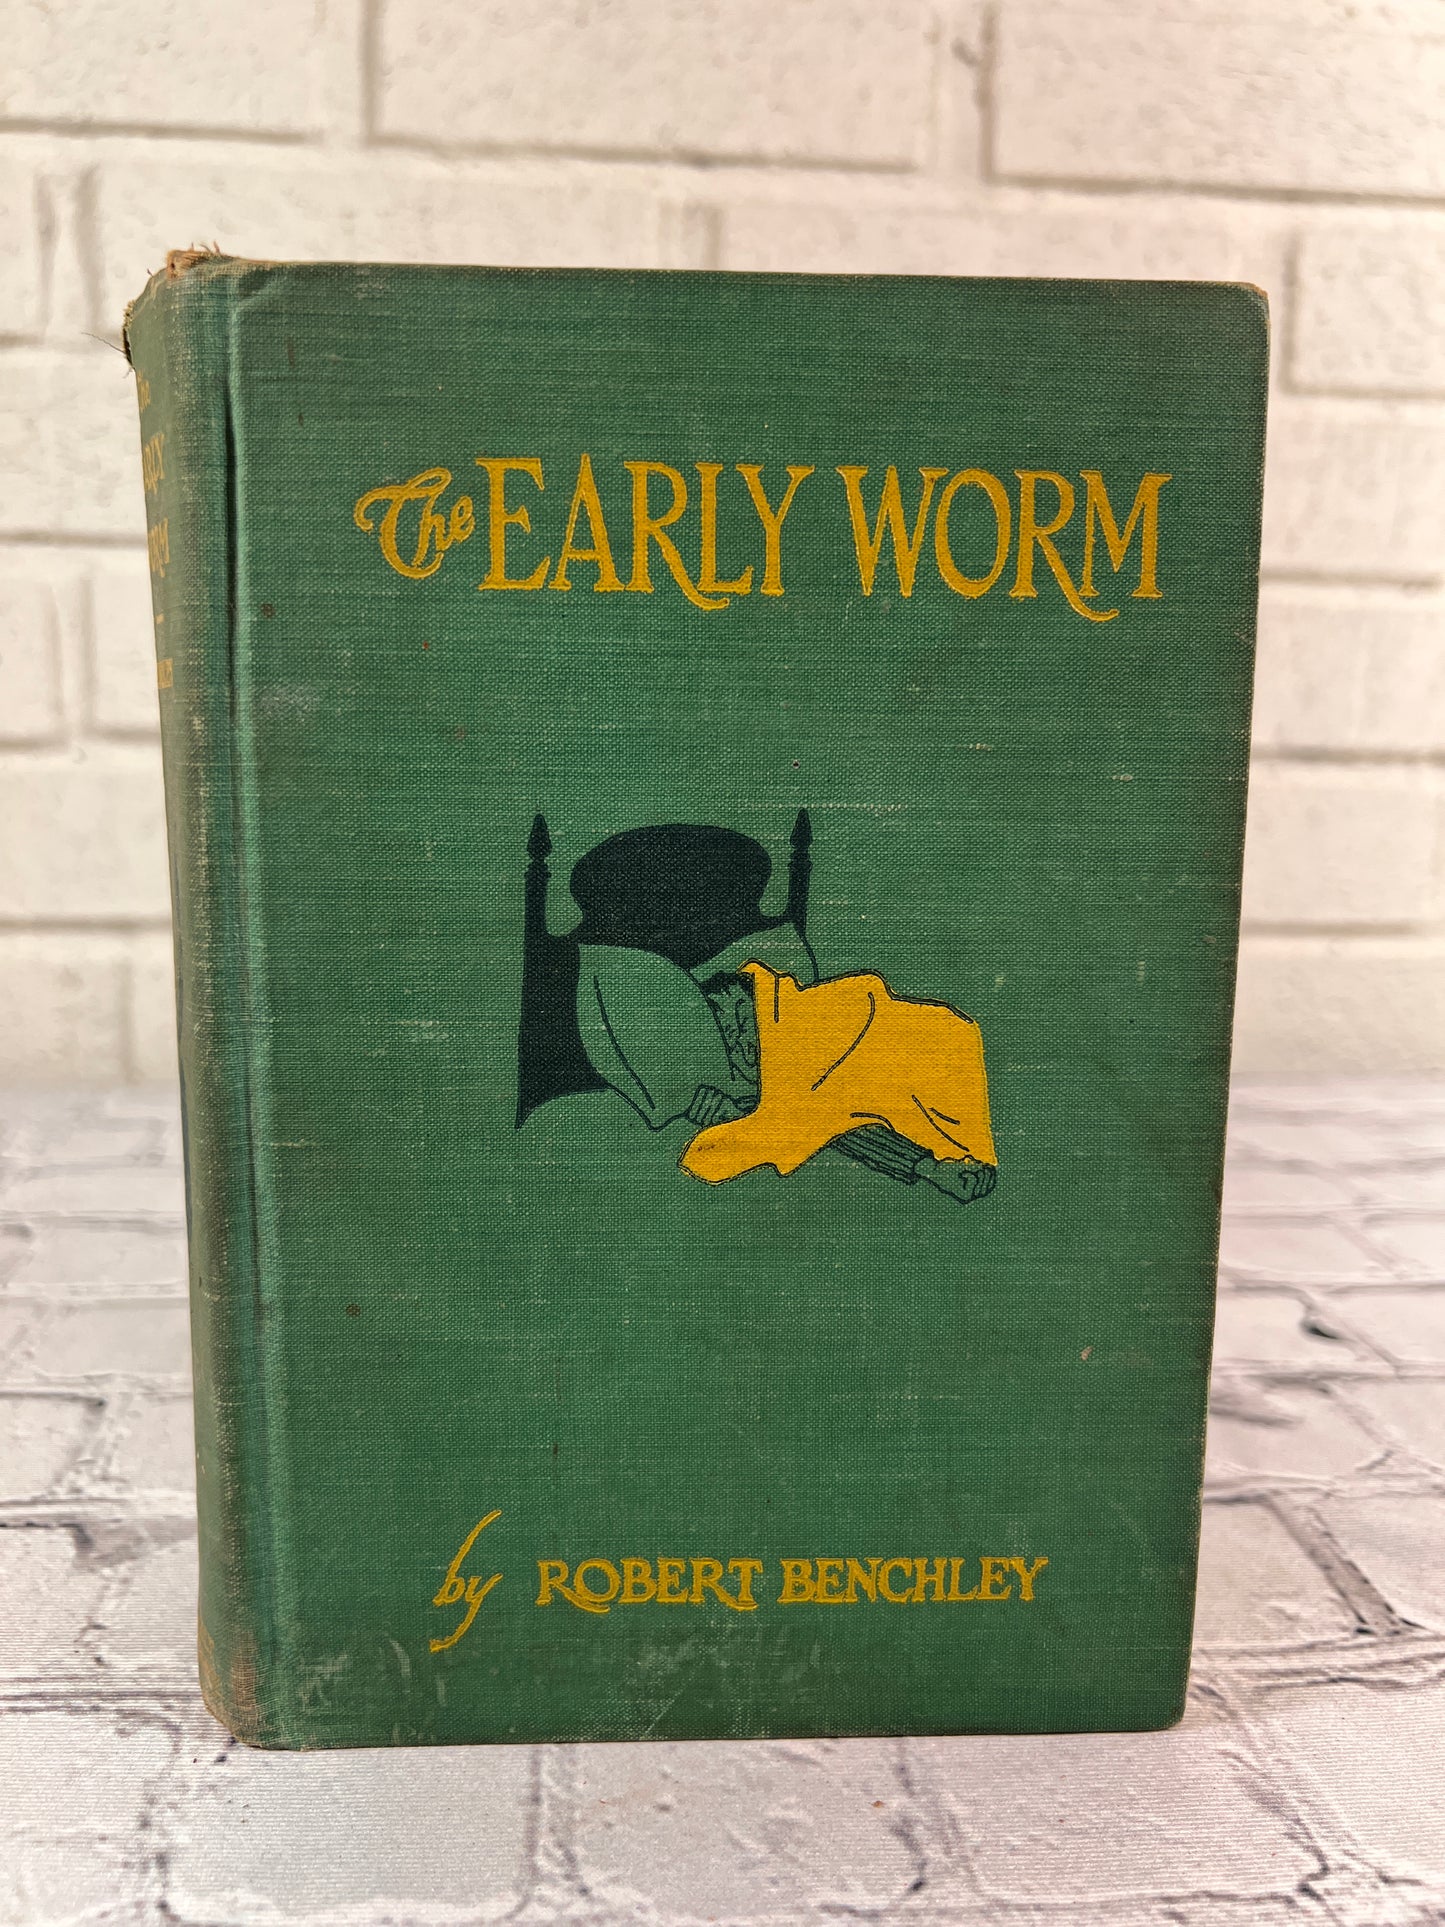 The Early Worm by Robert Benchley [1927 · 1st Edition]